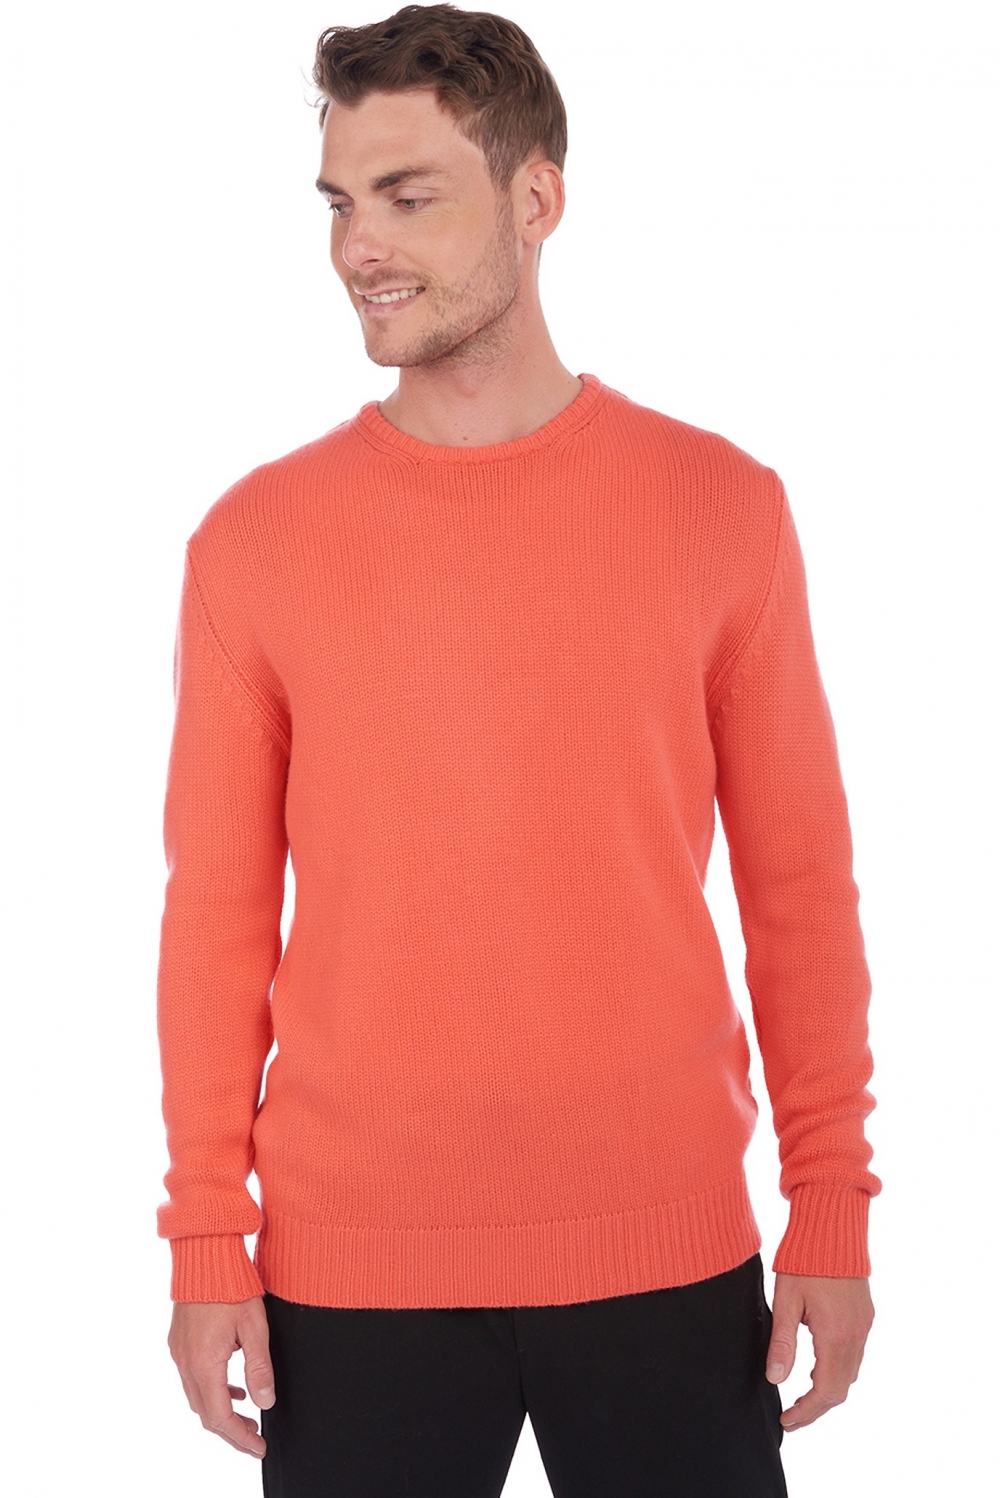 Cachemire pull homme col rond bilal corail lumineux 4xl